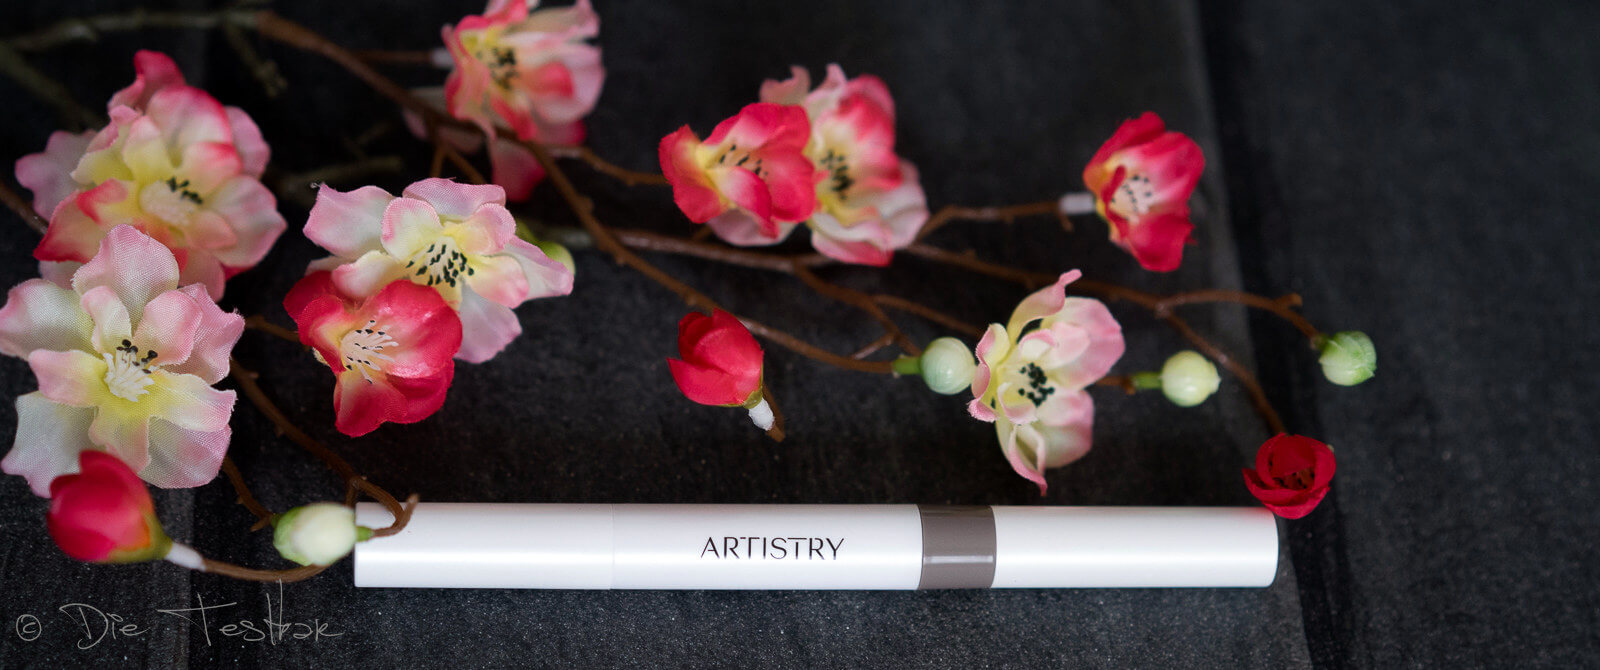 Review - Artistry Future Glow Serum Foundation und Go Vibrant Eye Collection 19